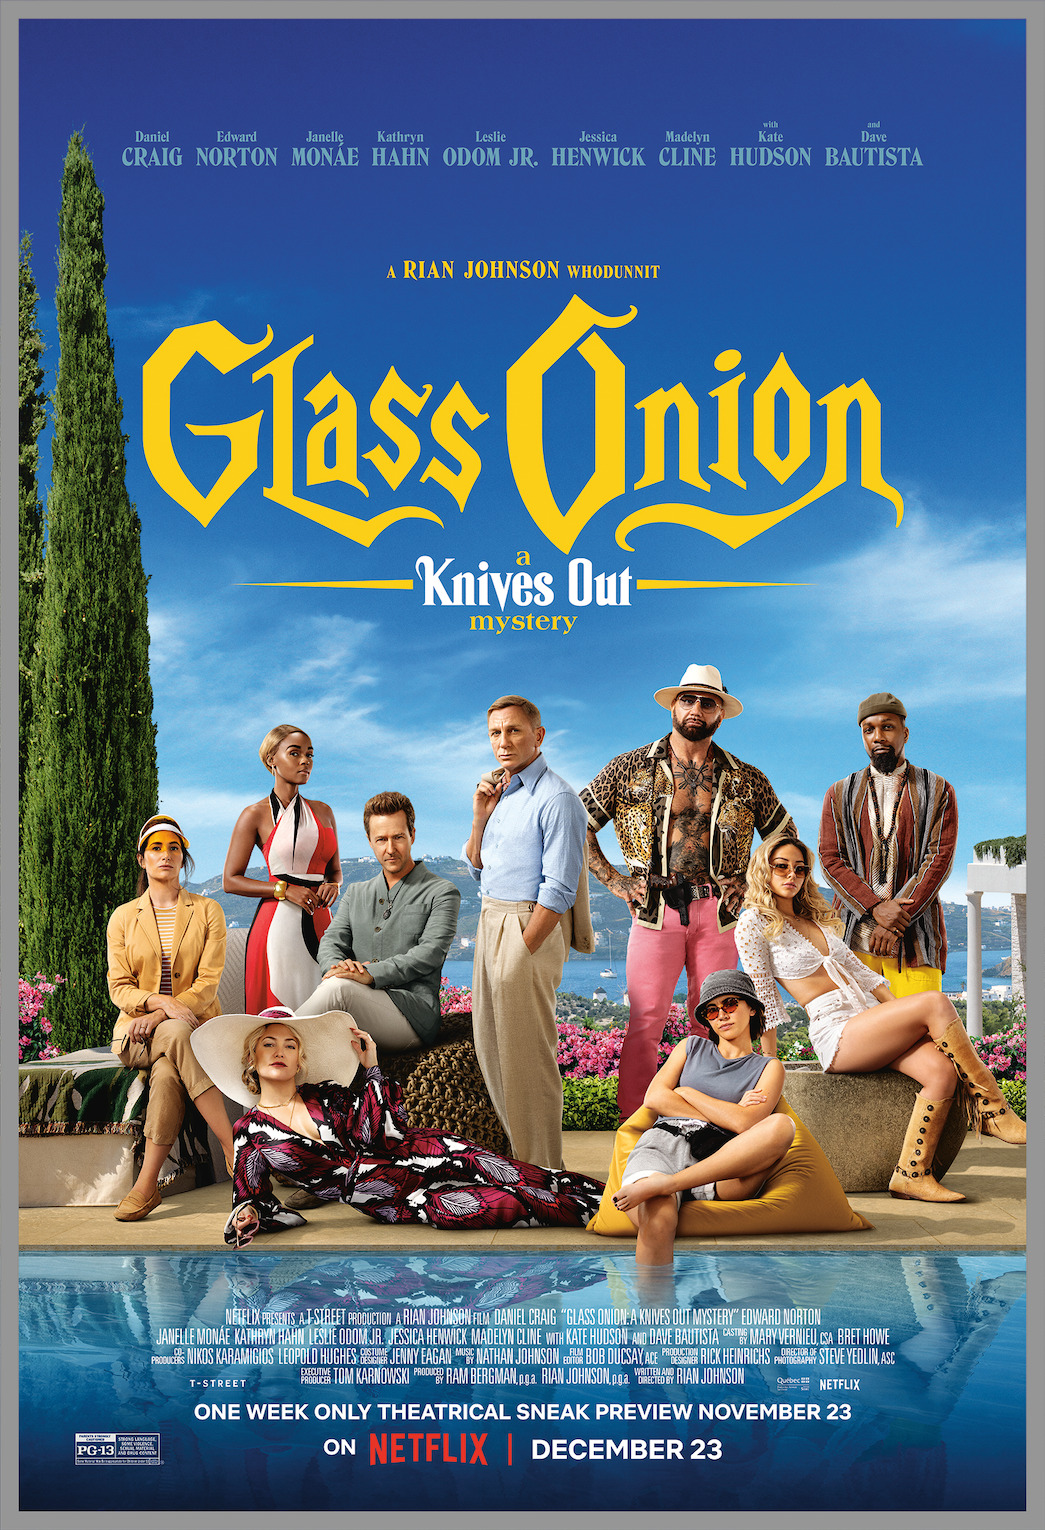 Promotional poster for GLASS ONION